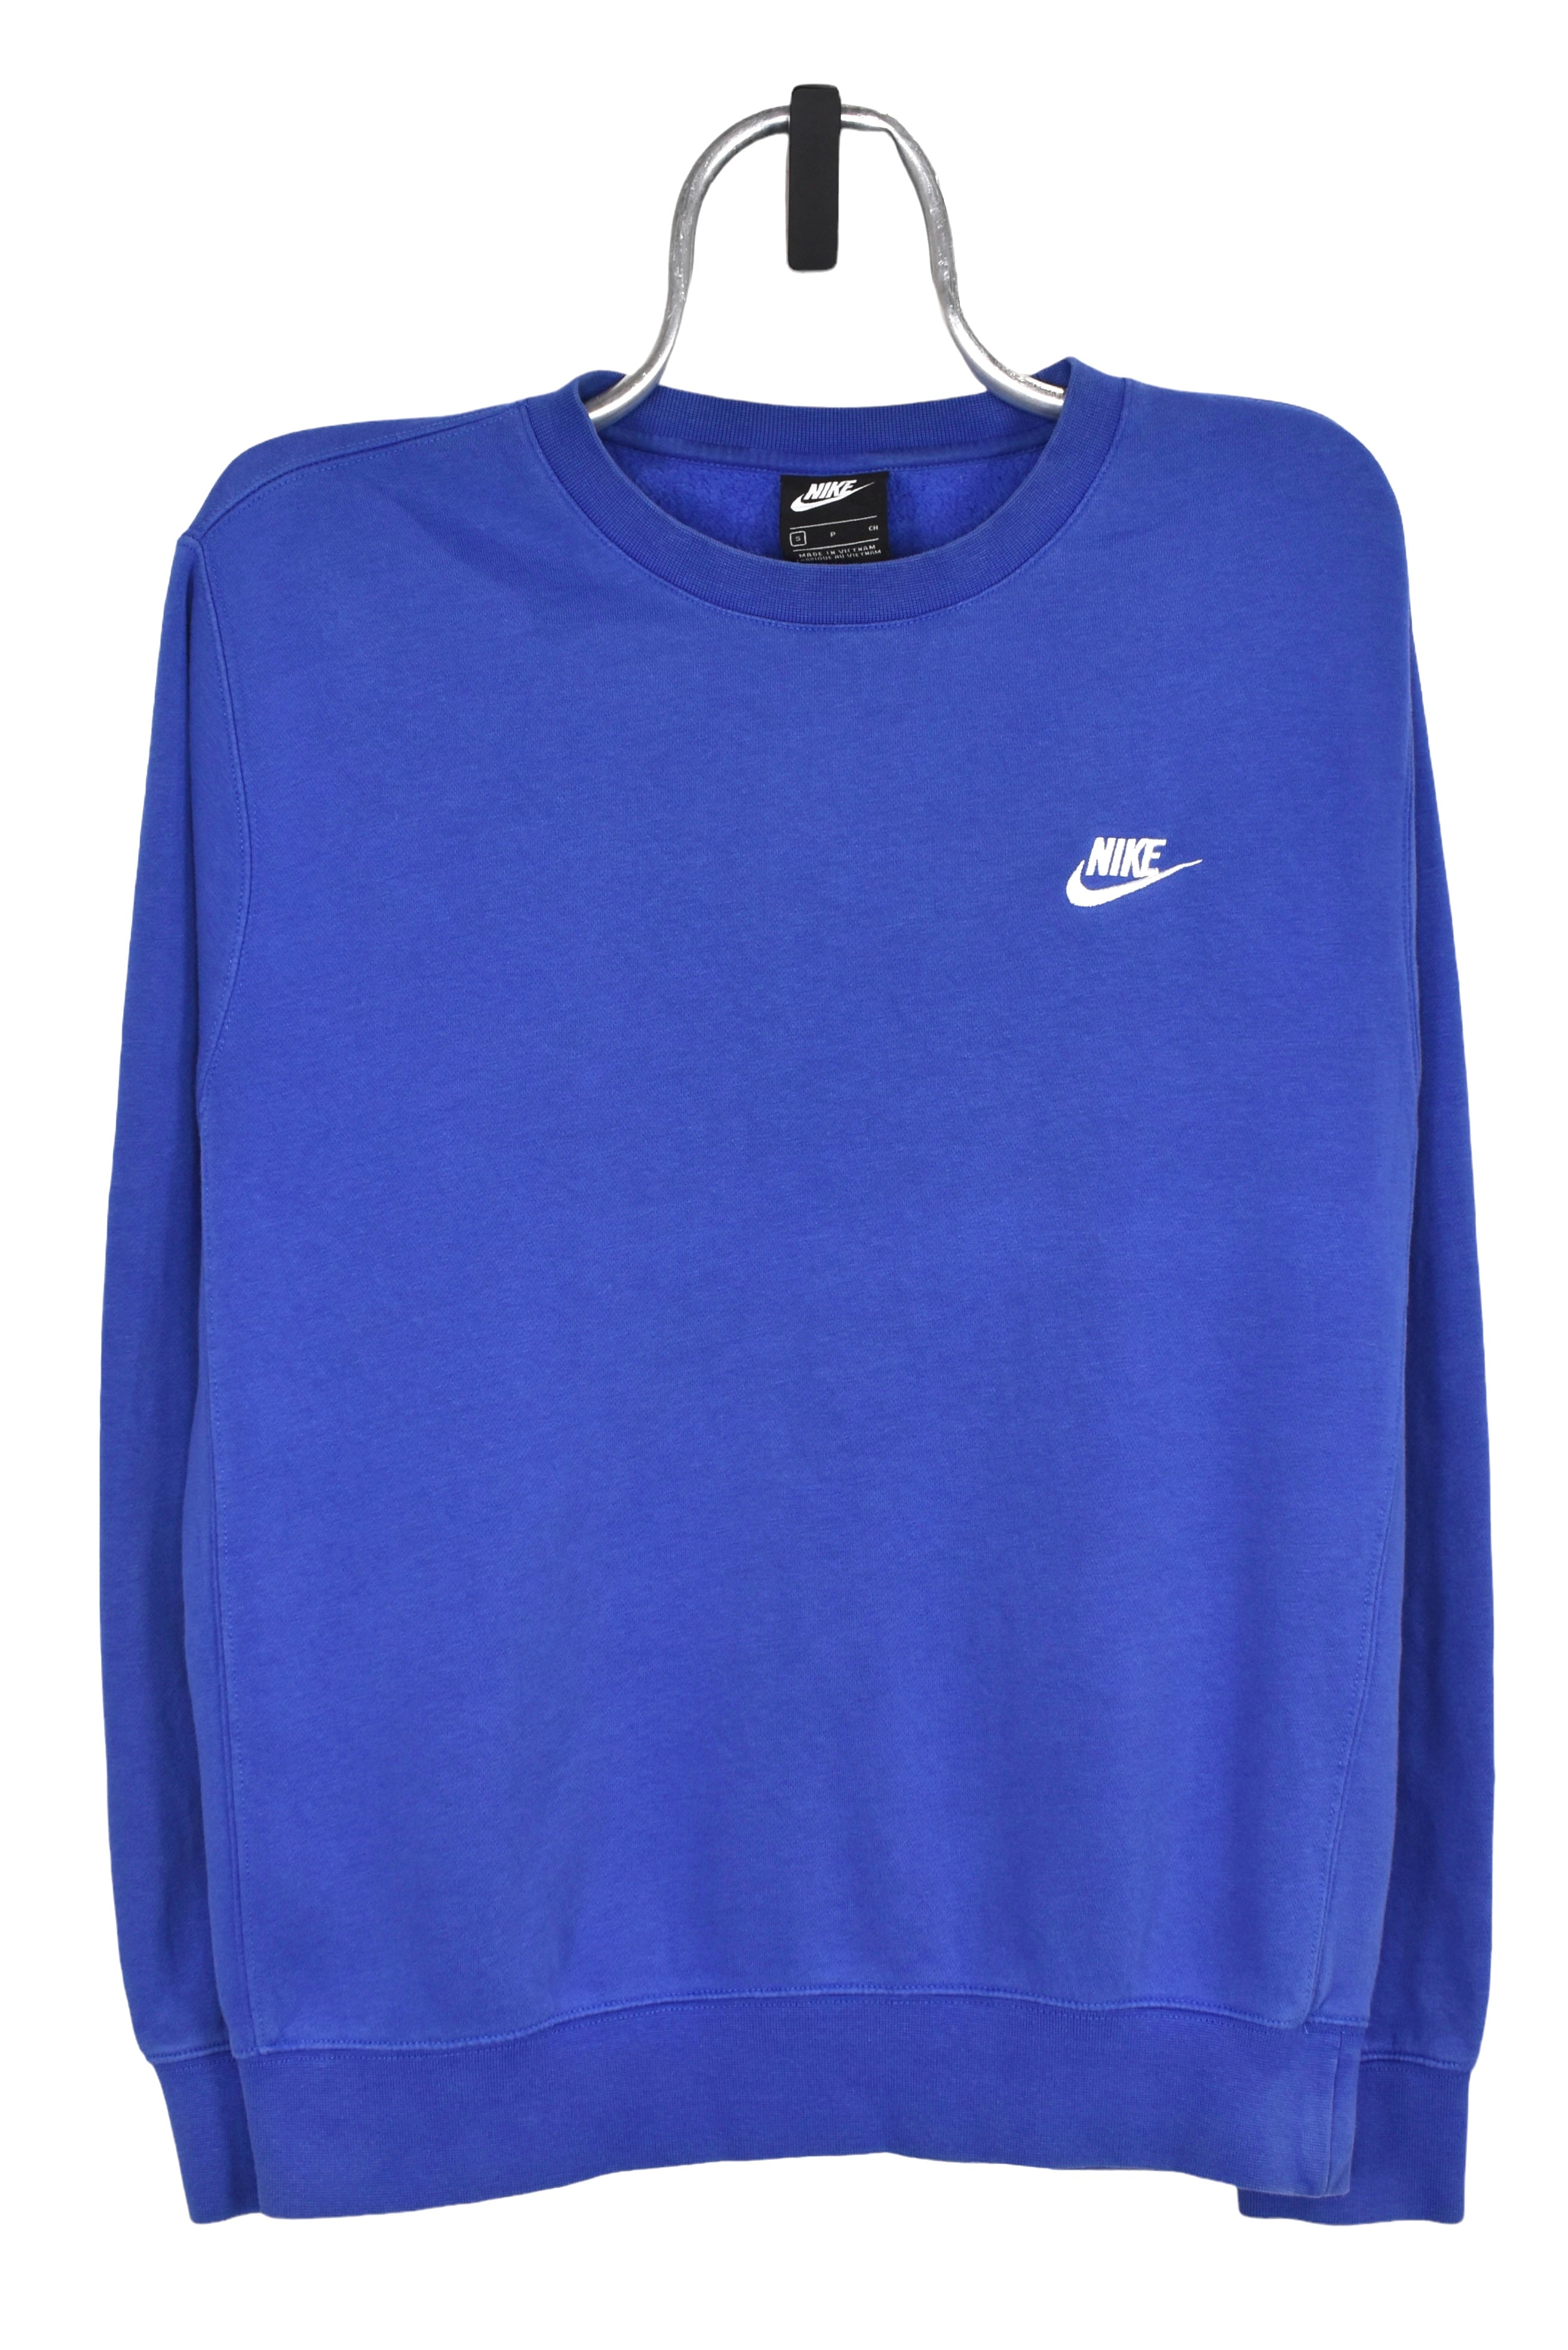 VINTAGE NIKE CLASSIC SWOOSH BLUE TEE SHIRT LATE 1990S XL MADE IN